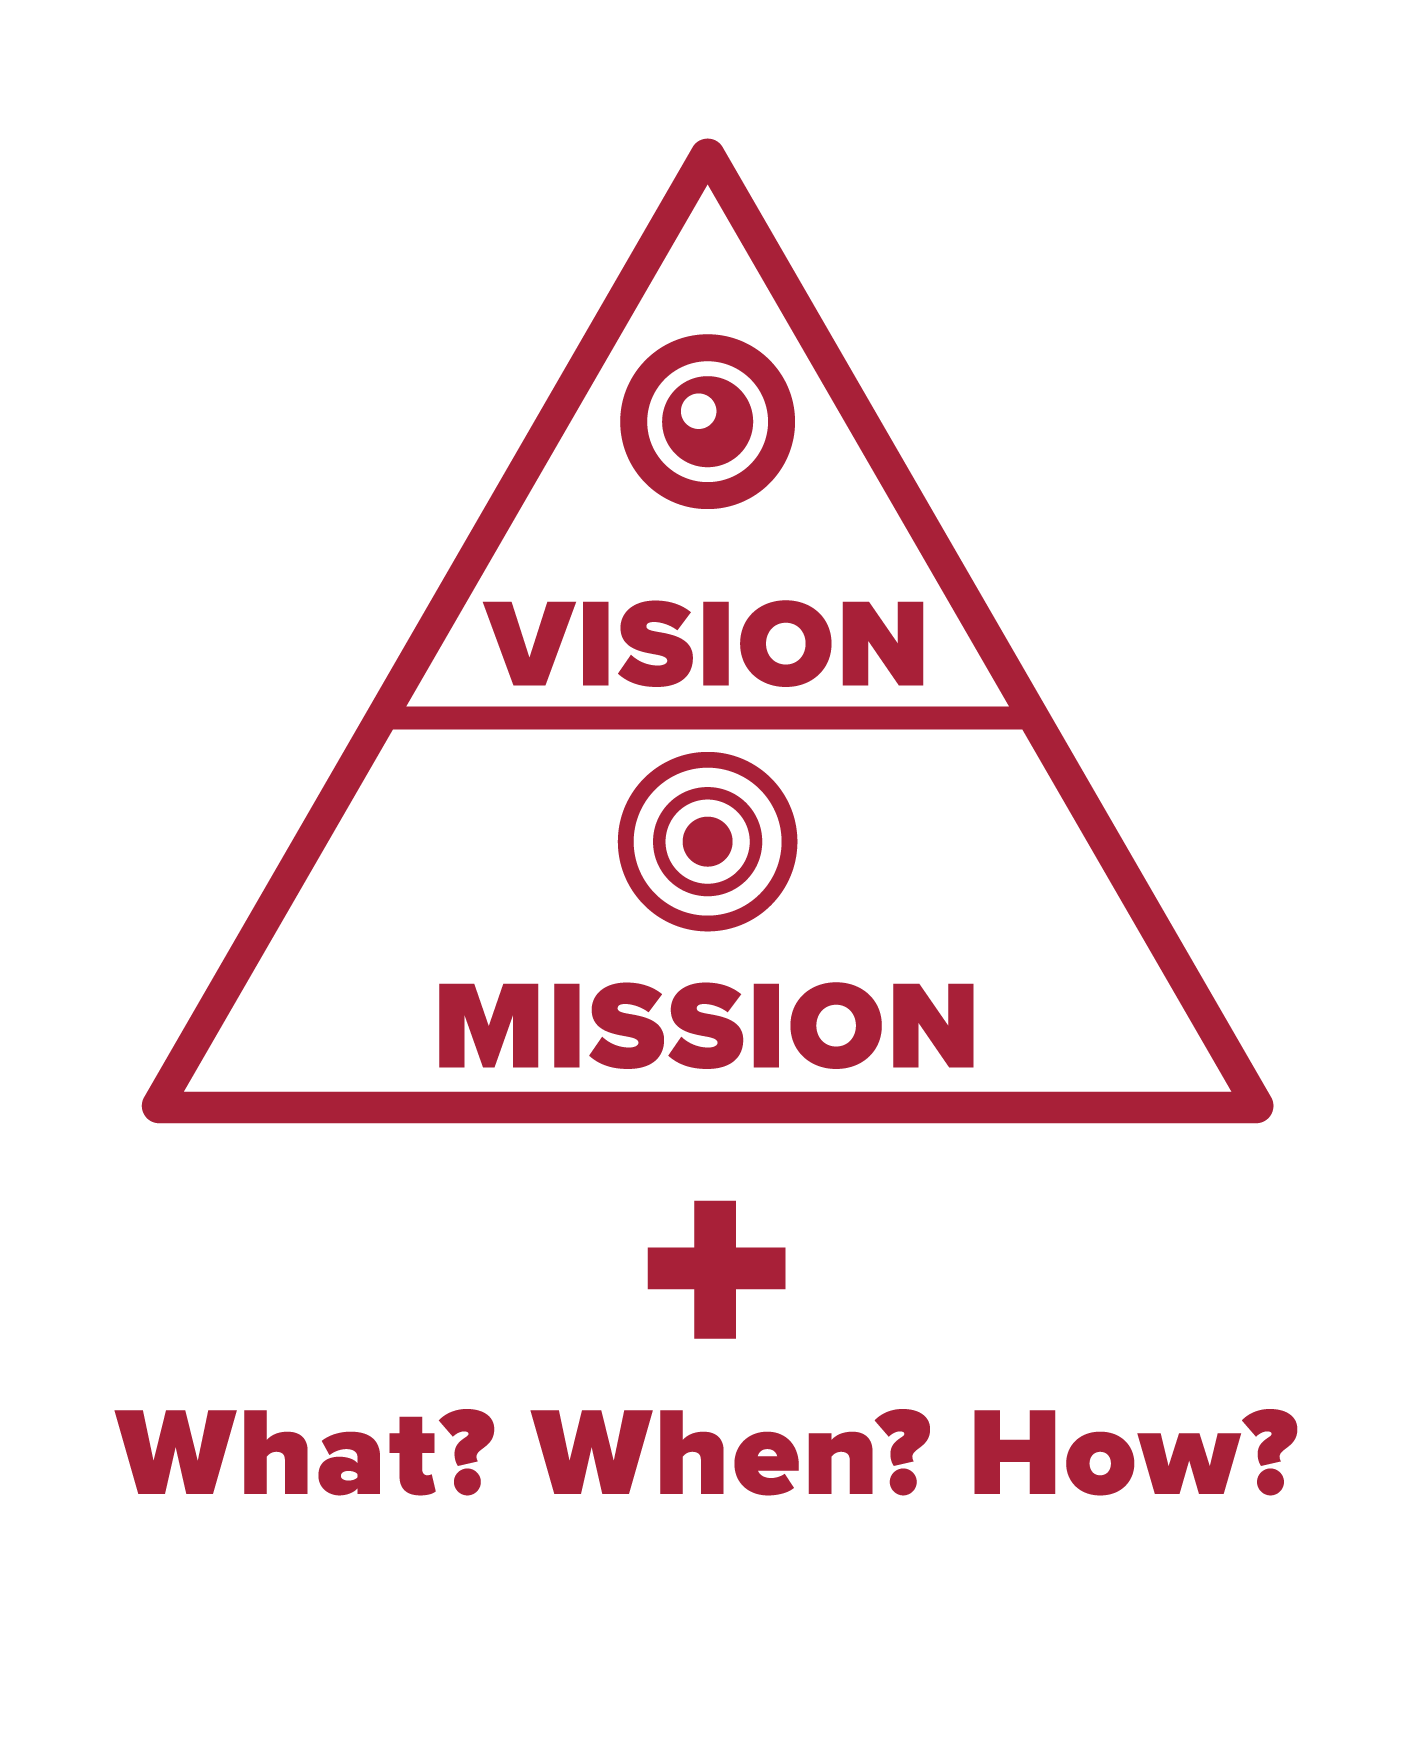 Image of Evaluation Strategy using the Vision/Mission Pyramid